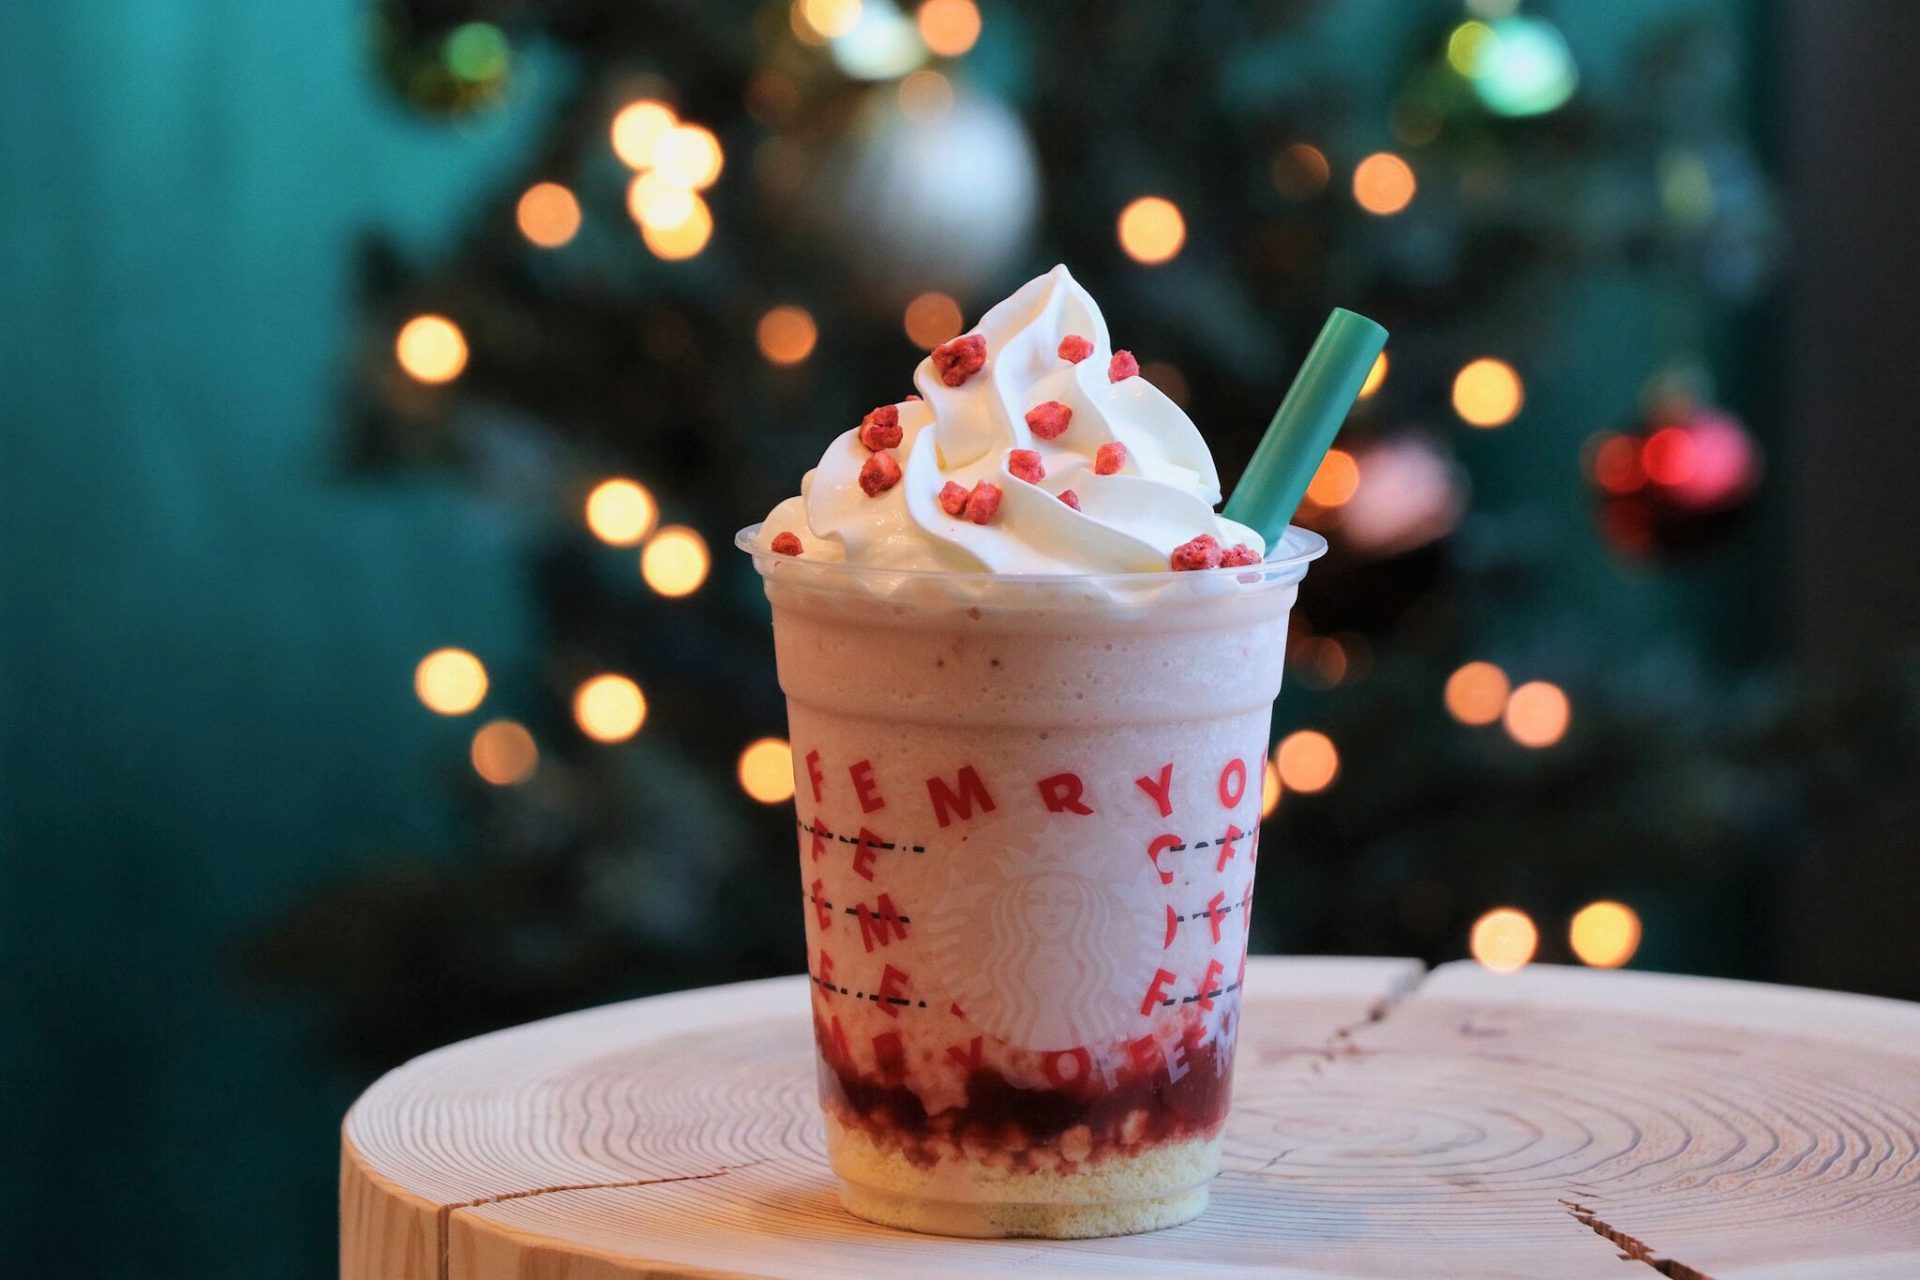 Merry Strawberry Cake Frappuccino - Japan